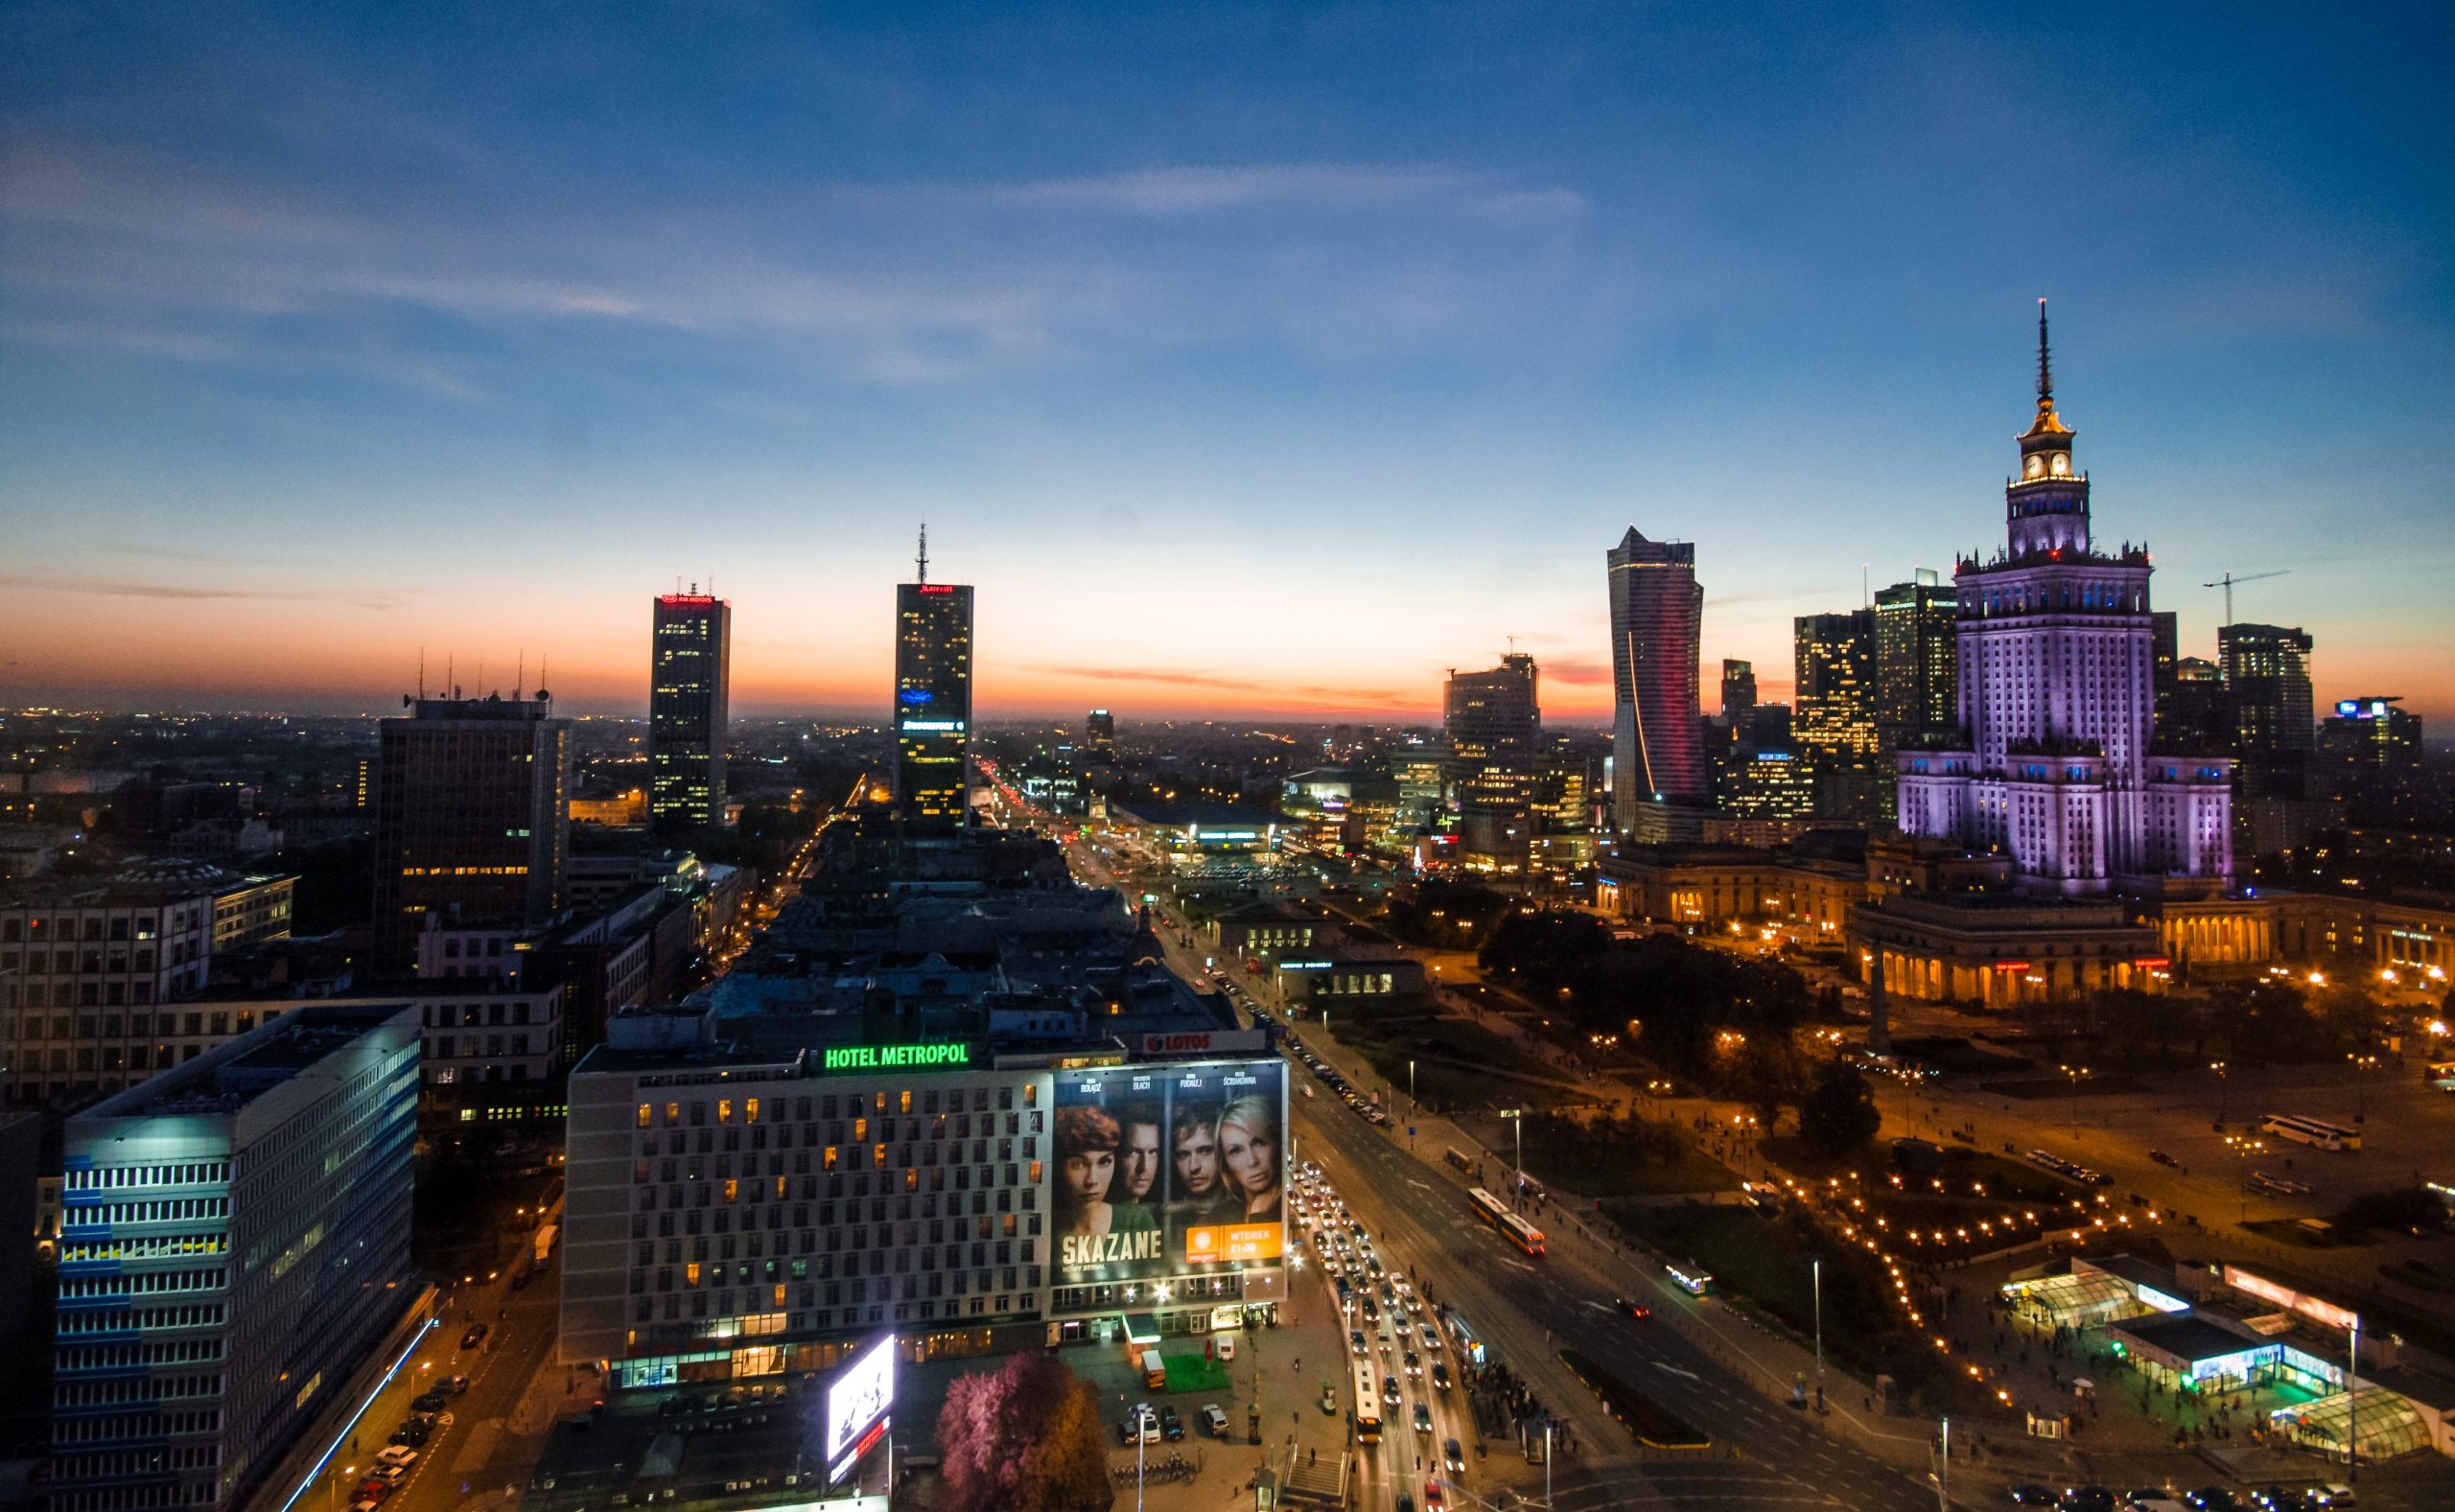 A view of the city skyline at dusk in Warsaw.